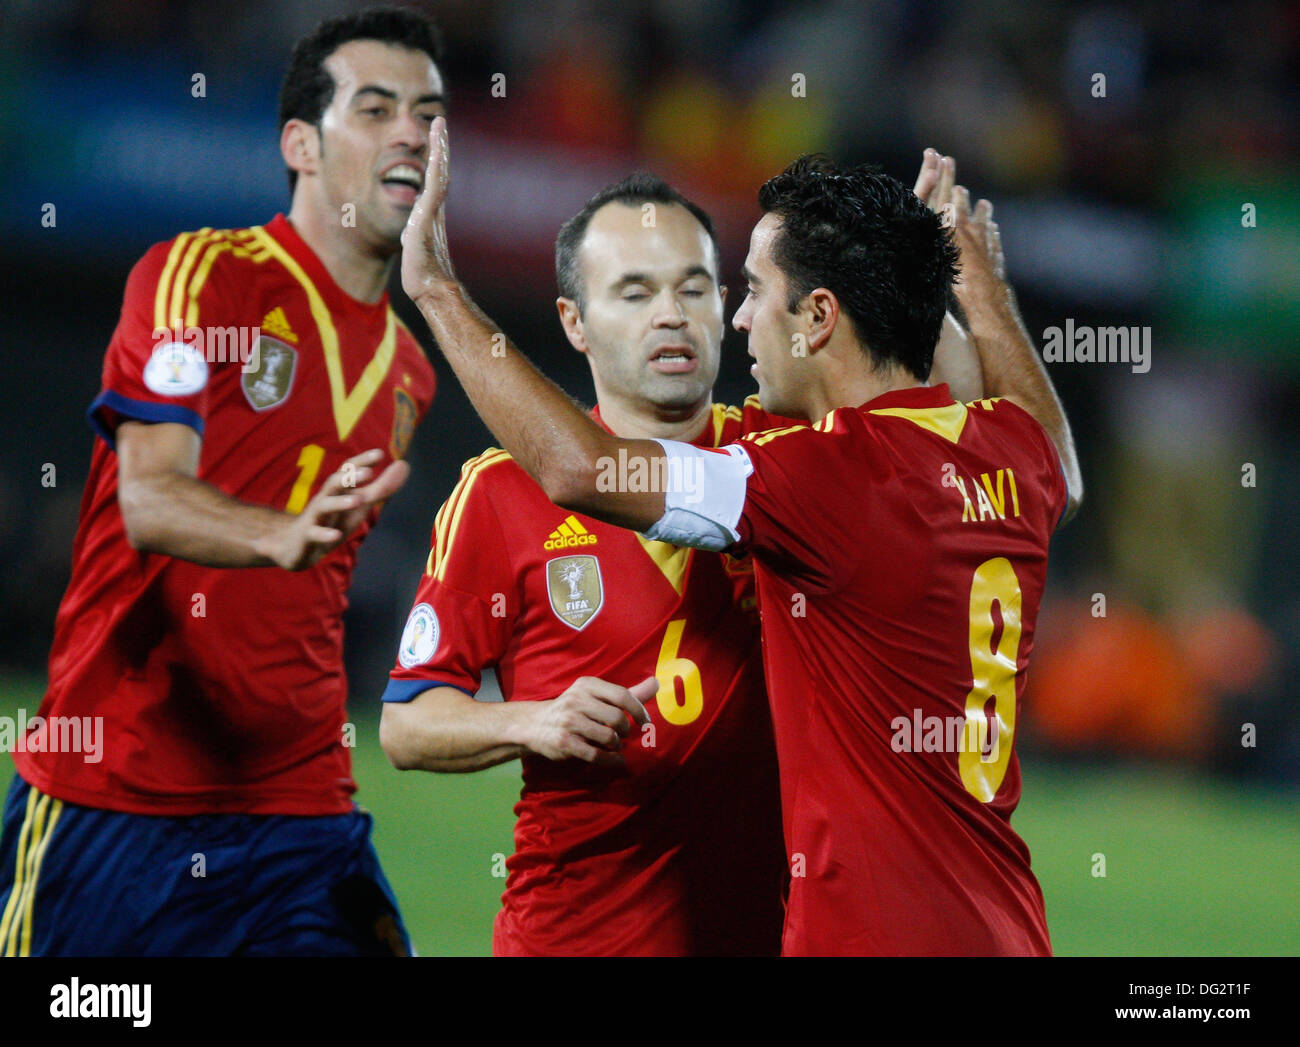 Palma de Mallorca, Spain, 12th Oct 2013, Spain«s soccer national team players Xavi (L) Iniesta (C) and Arbeloa celebrate after scoring a goal during their 2014 World Cup qualifying soccer match against Belarus at Son Moix stadium in Palma de Mallorca on friday 11th October. Zixia/Alamy Live News. Stock Photo